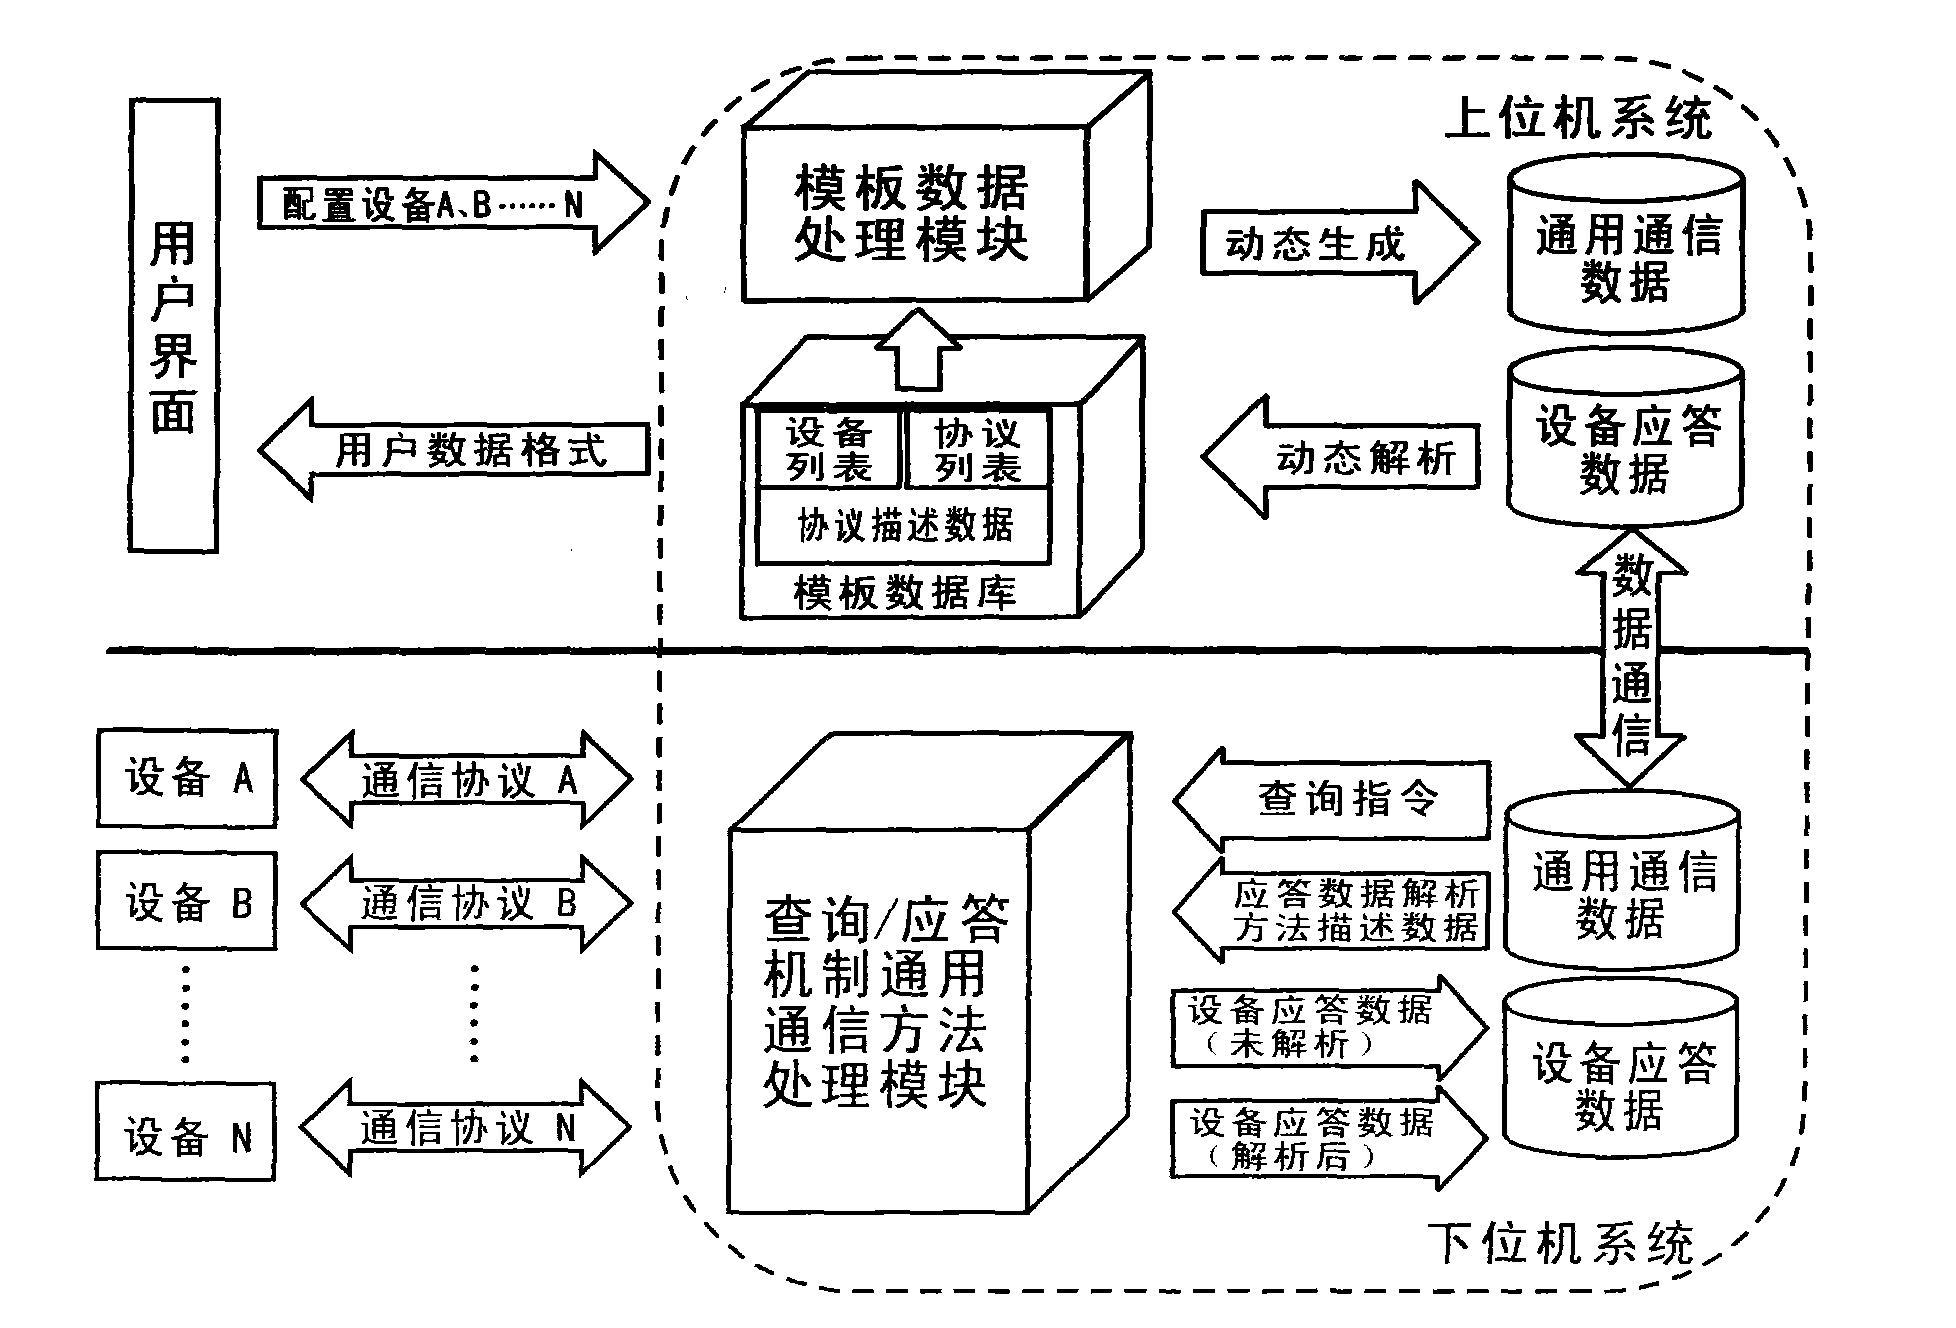 Communication method of automatic control equipment based on upper and lower computer structures